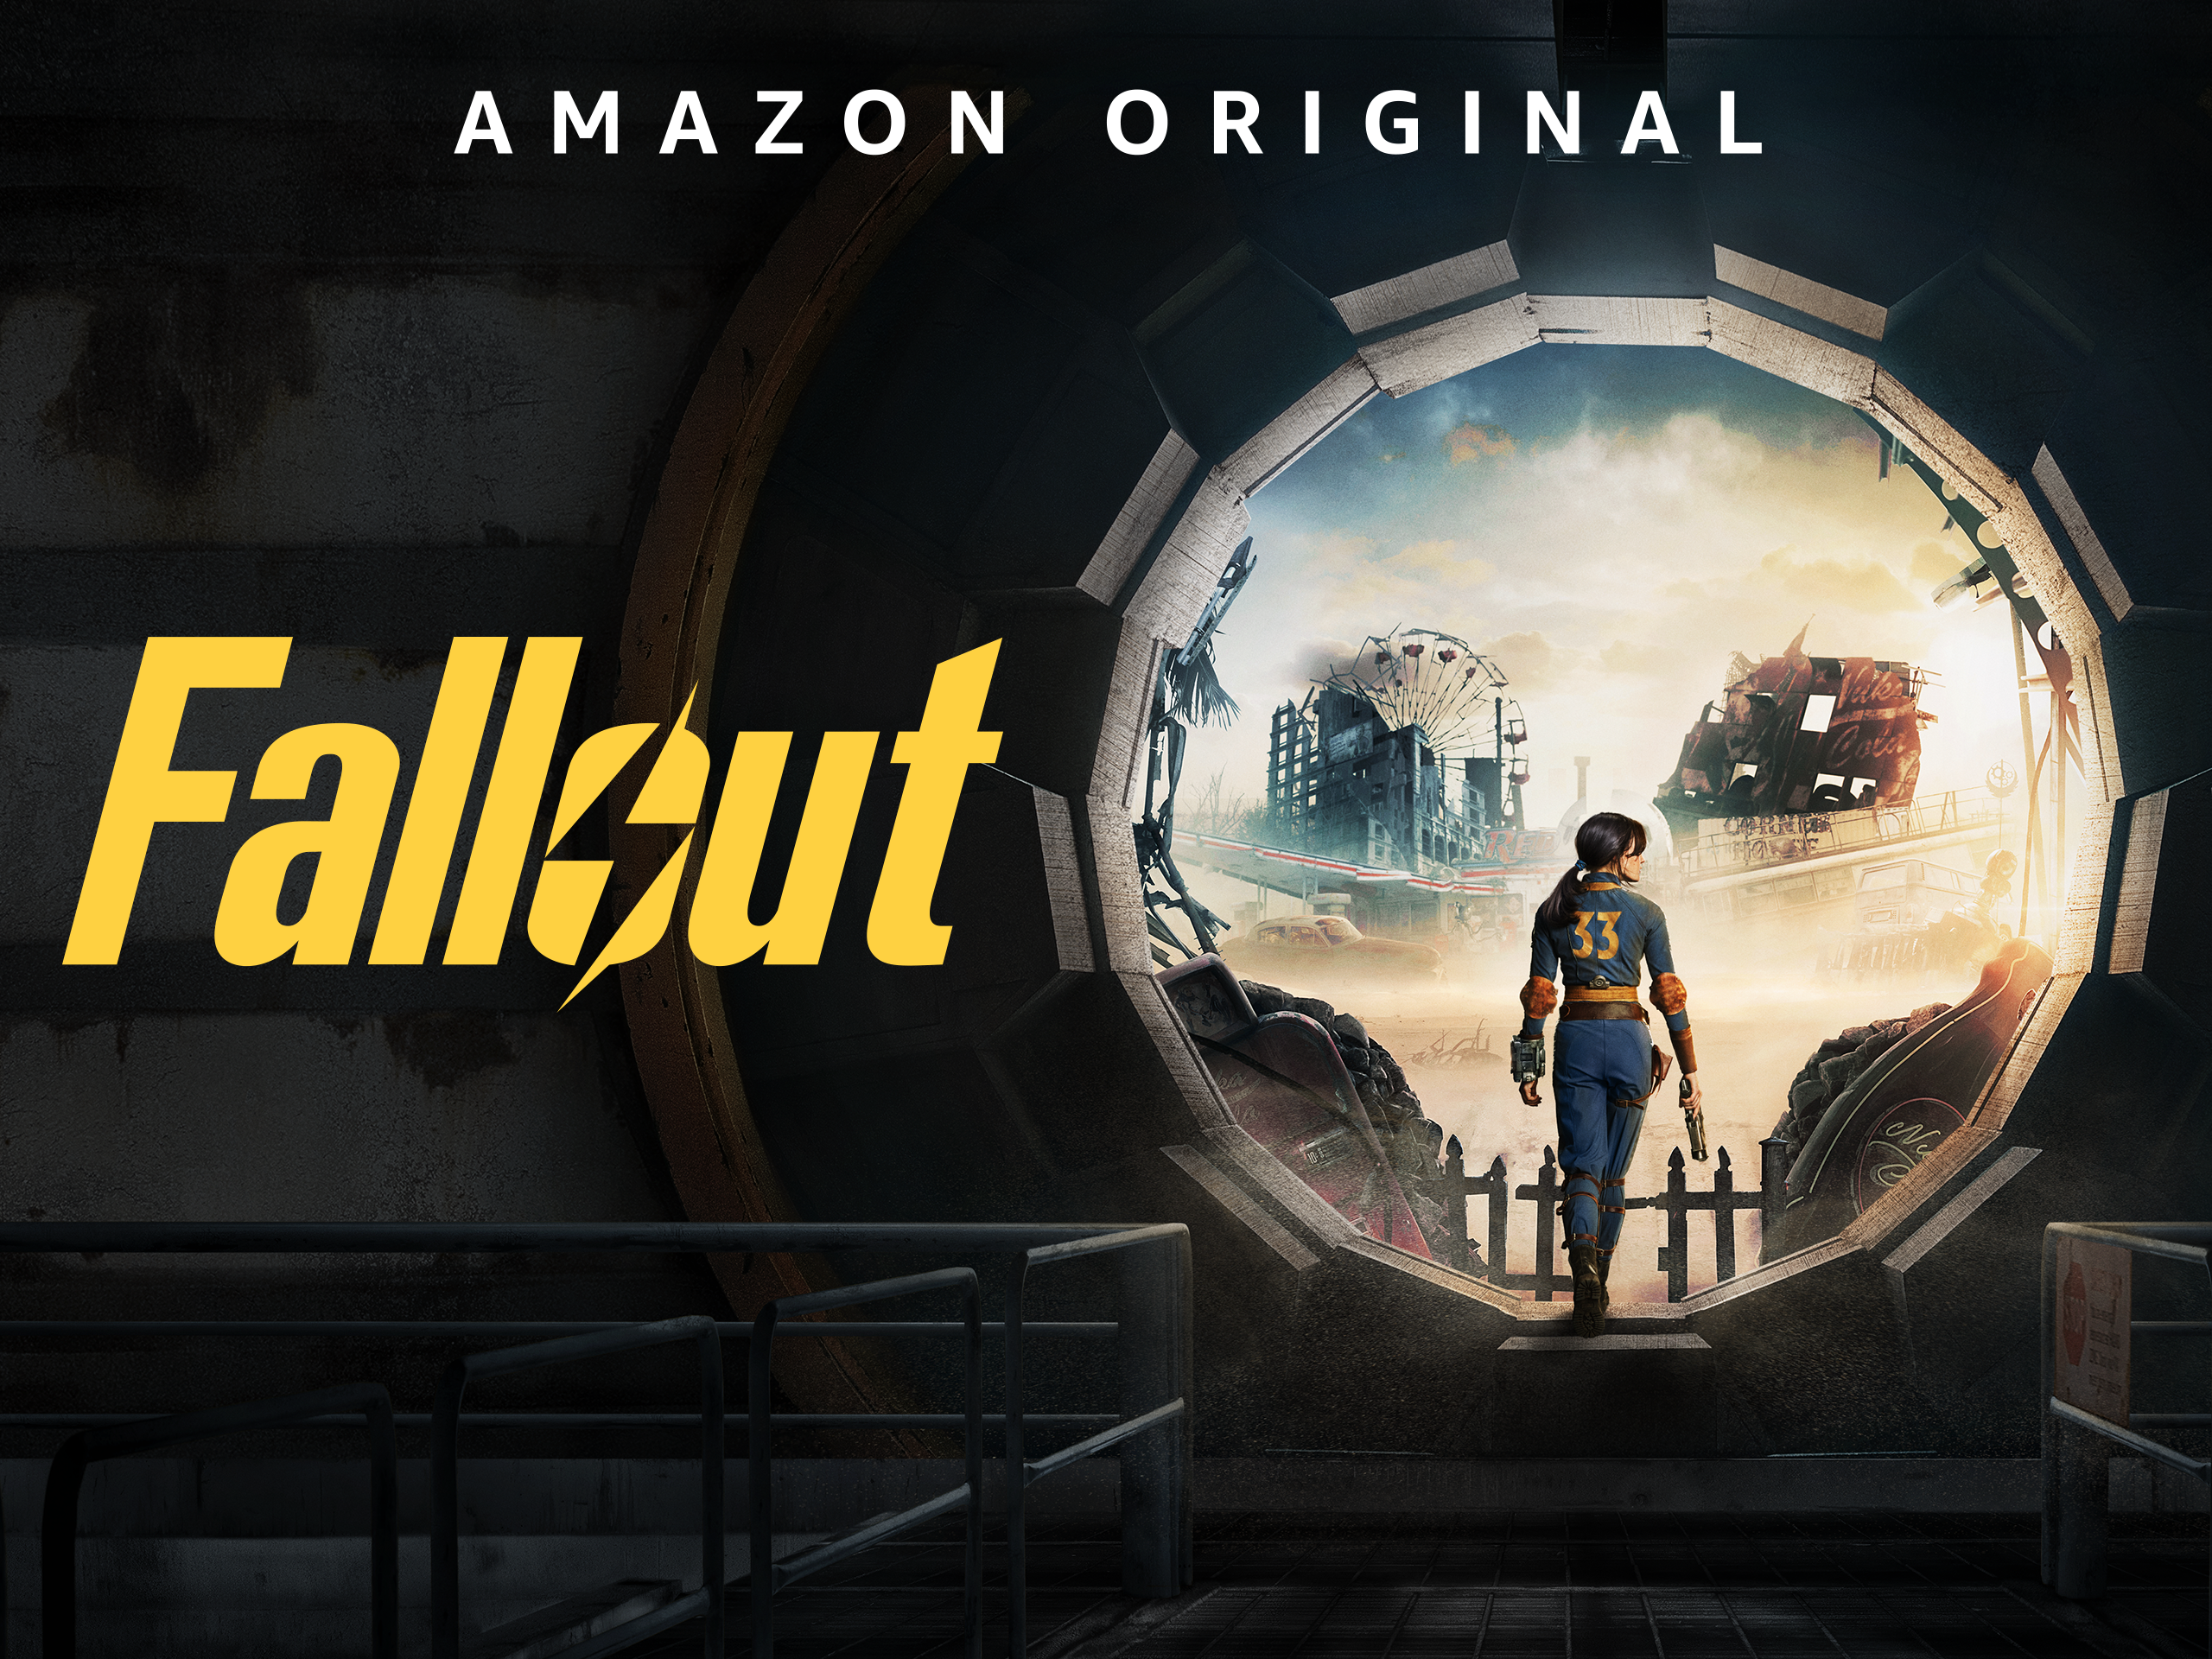 Fallout Adaptation Emerges as Prime Video Powerhouse